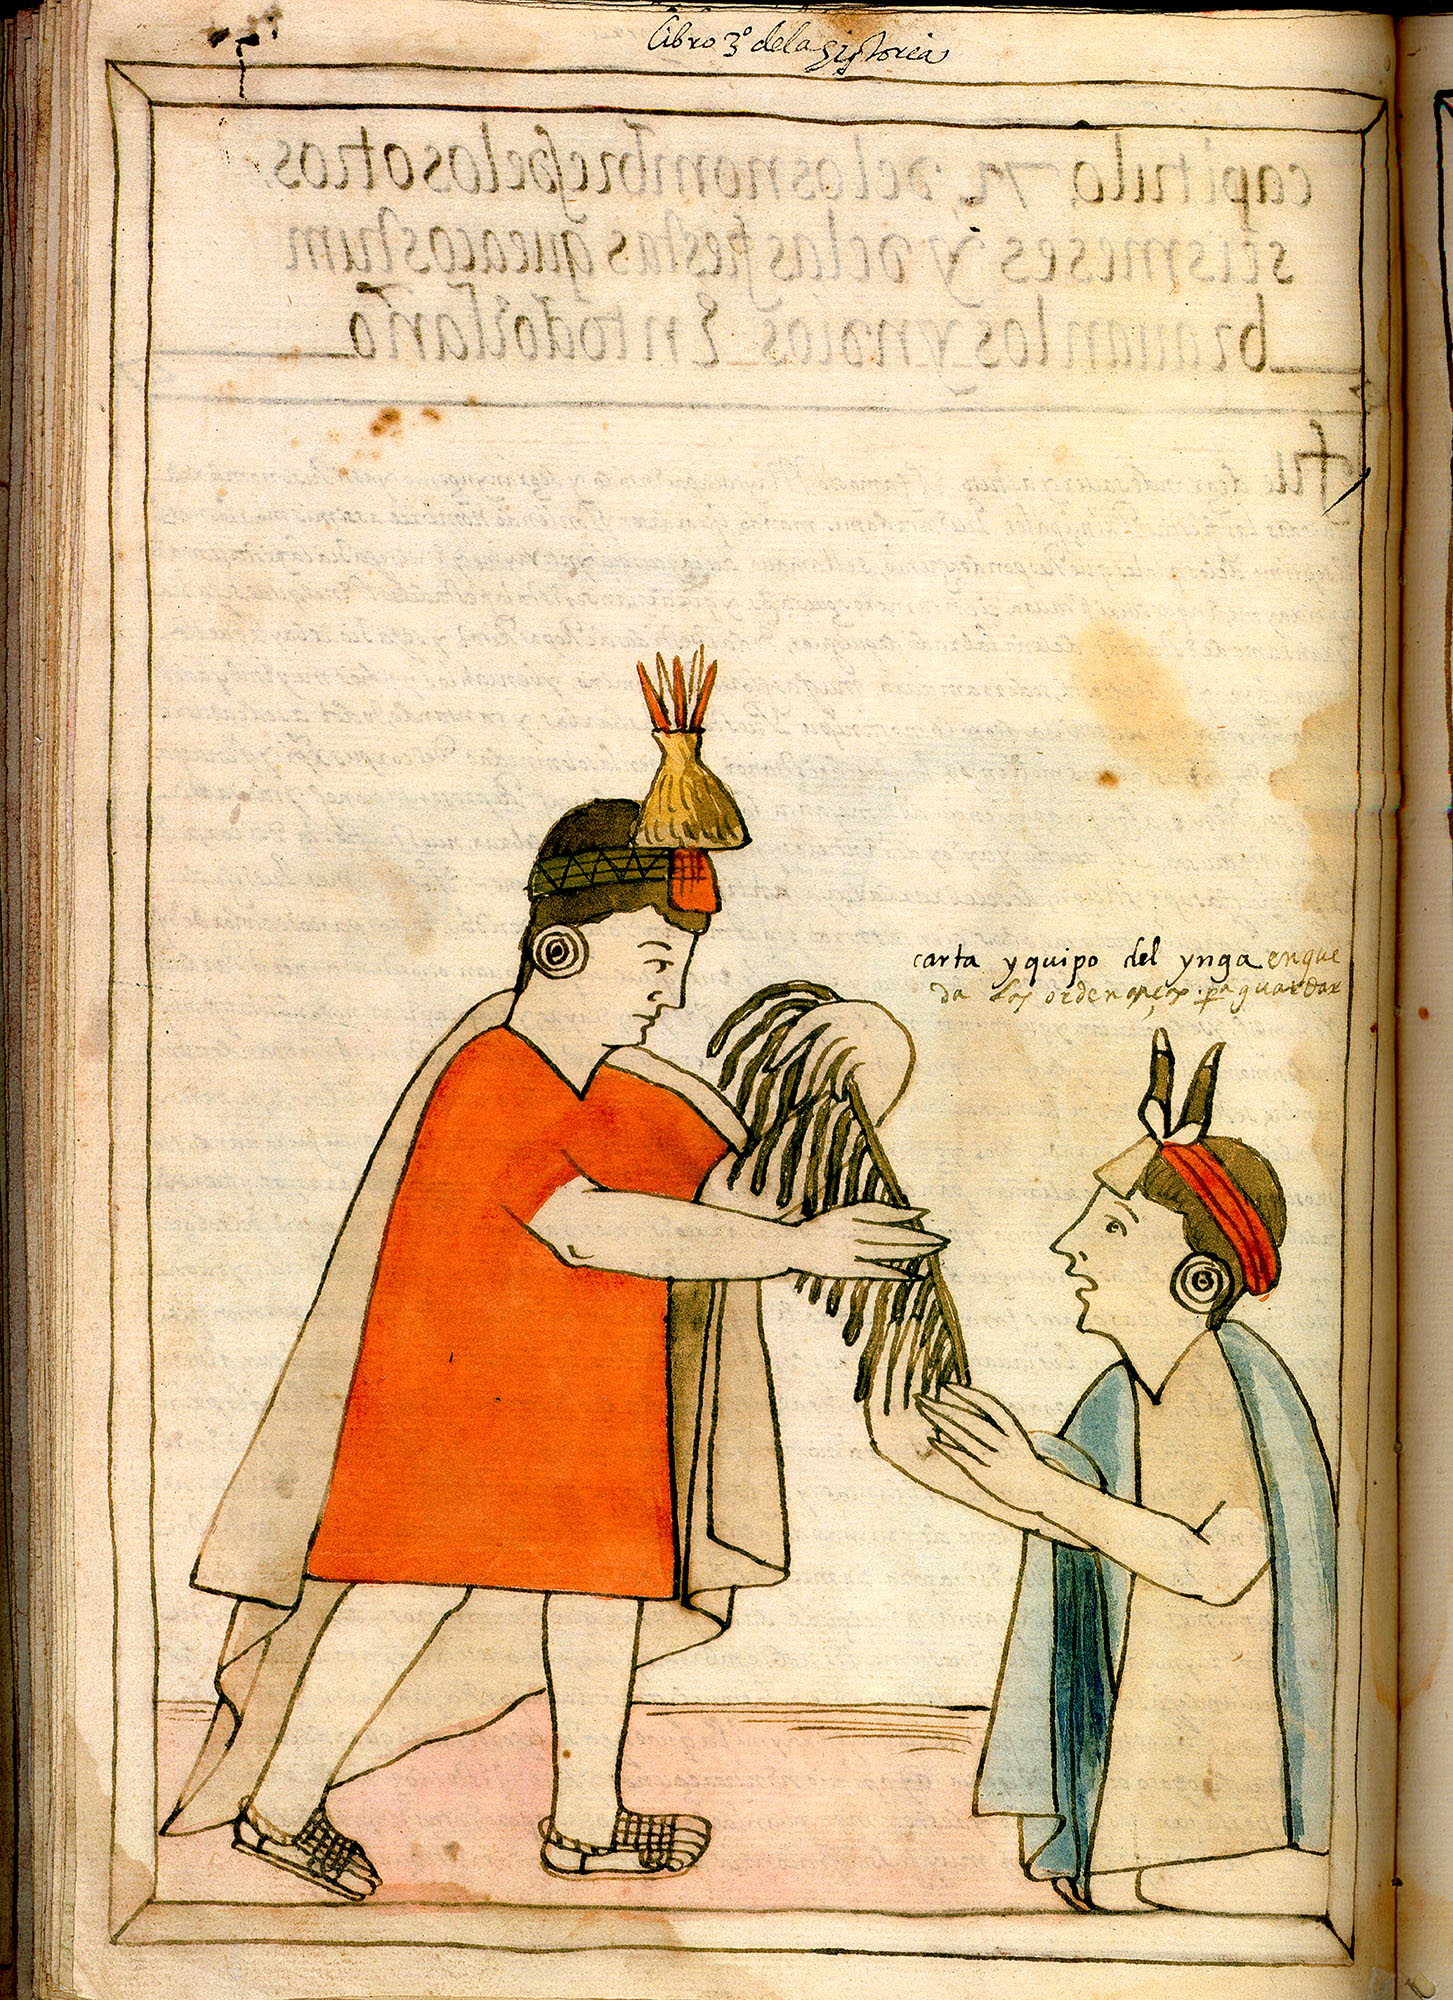 Fig. 2: “Letter or khipu of the Inka, where he gives the orders to follow.”